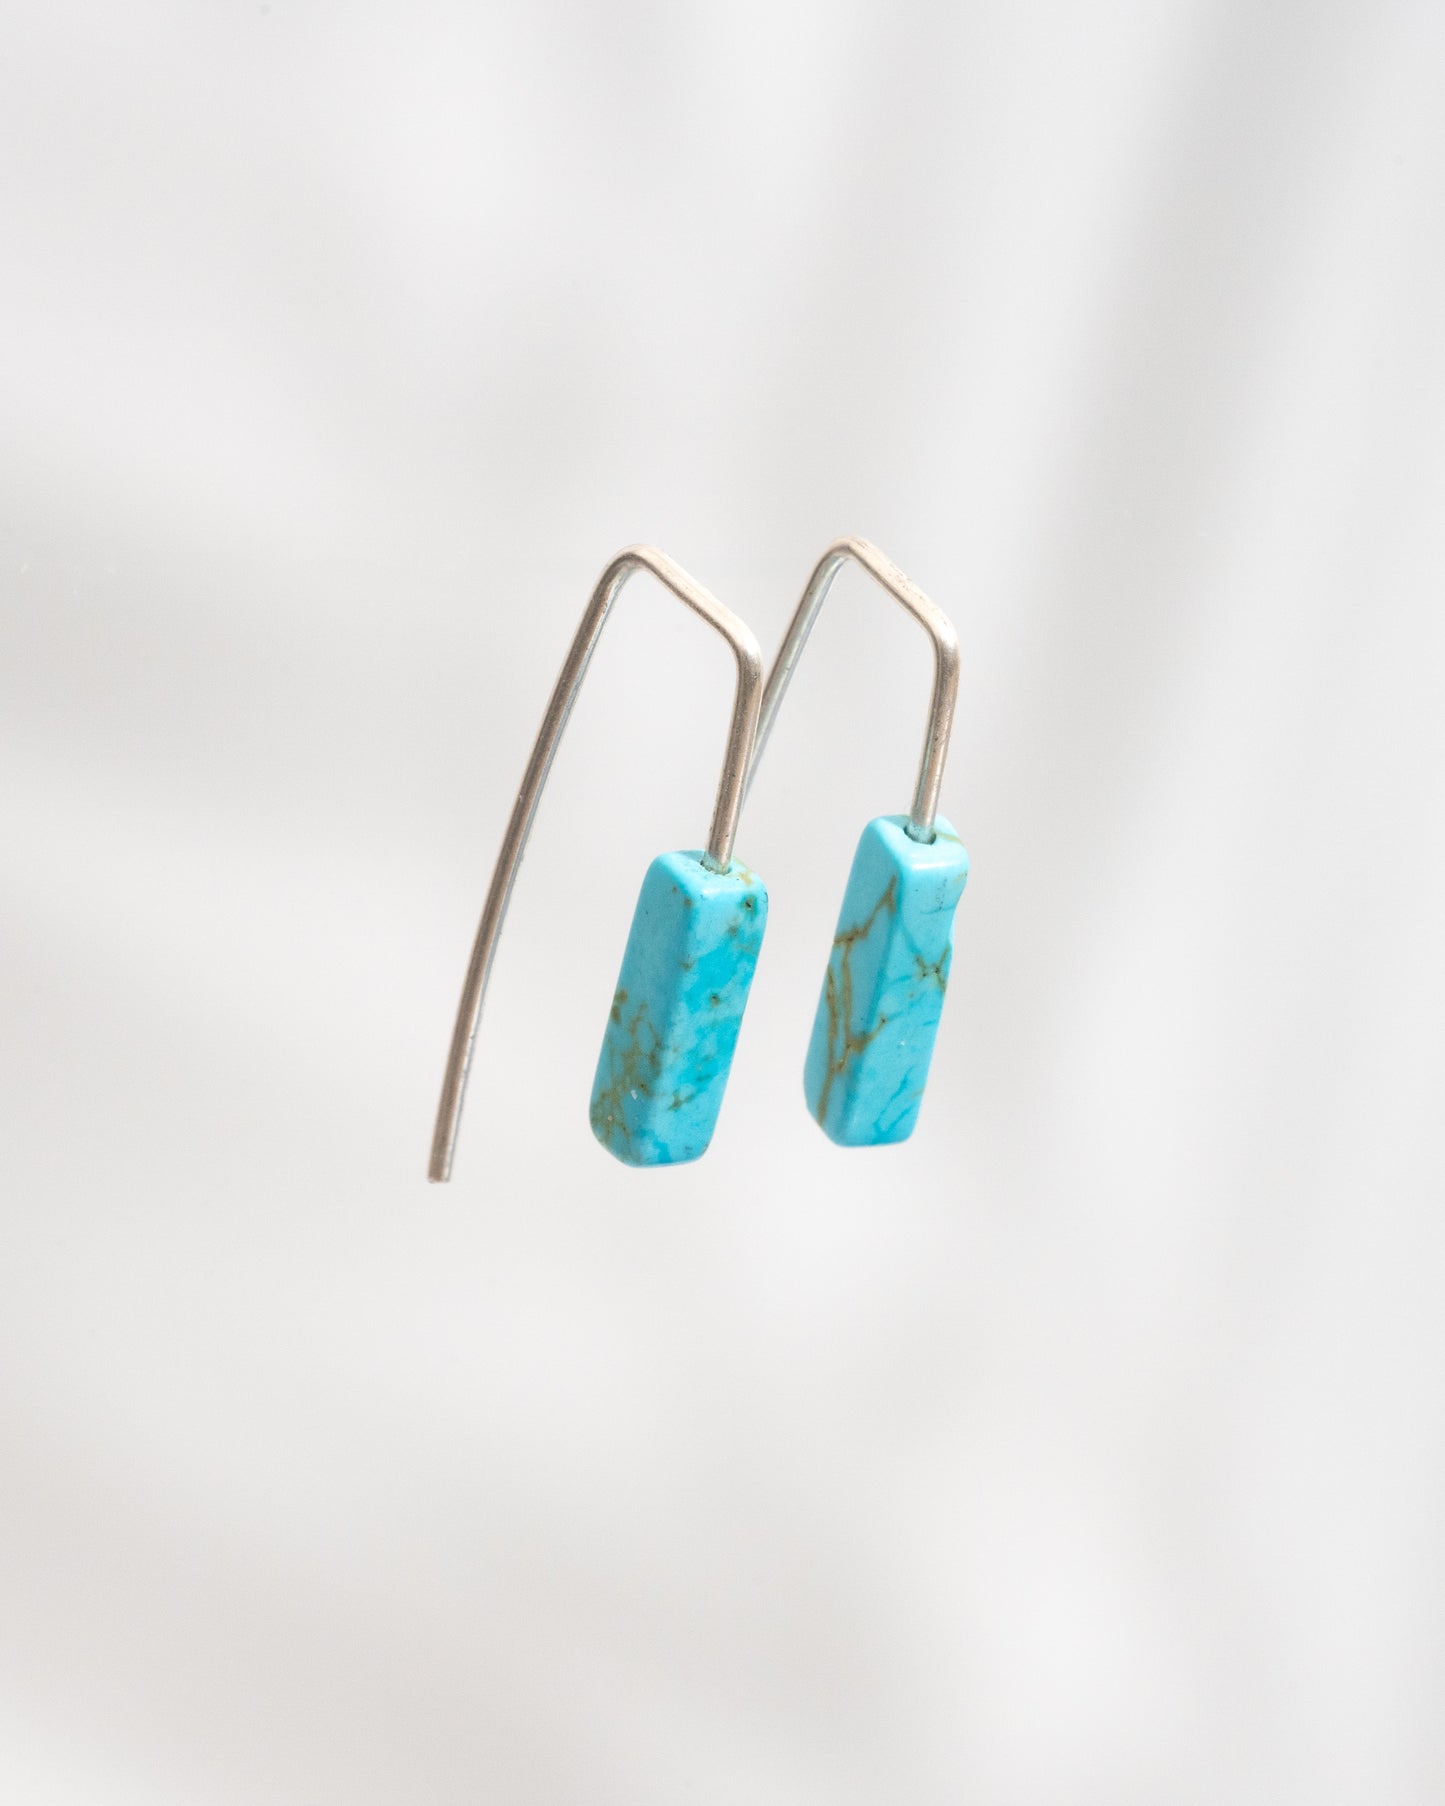 Serenity Earrings: Sterling Silver Threader Earrings with Geometric Turquoise stones